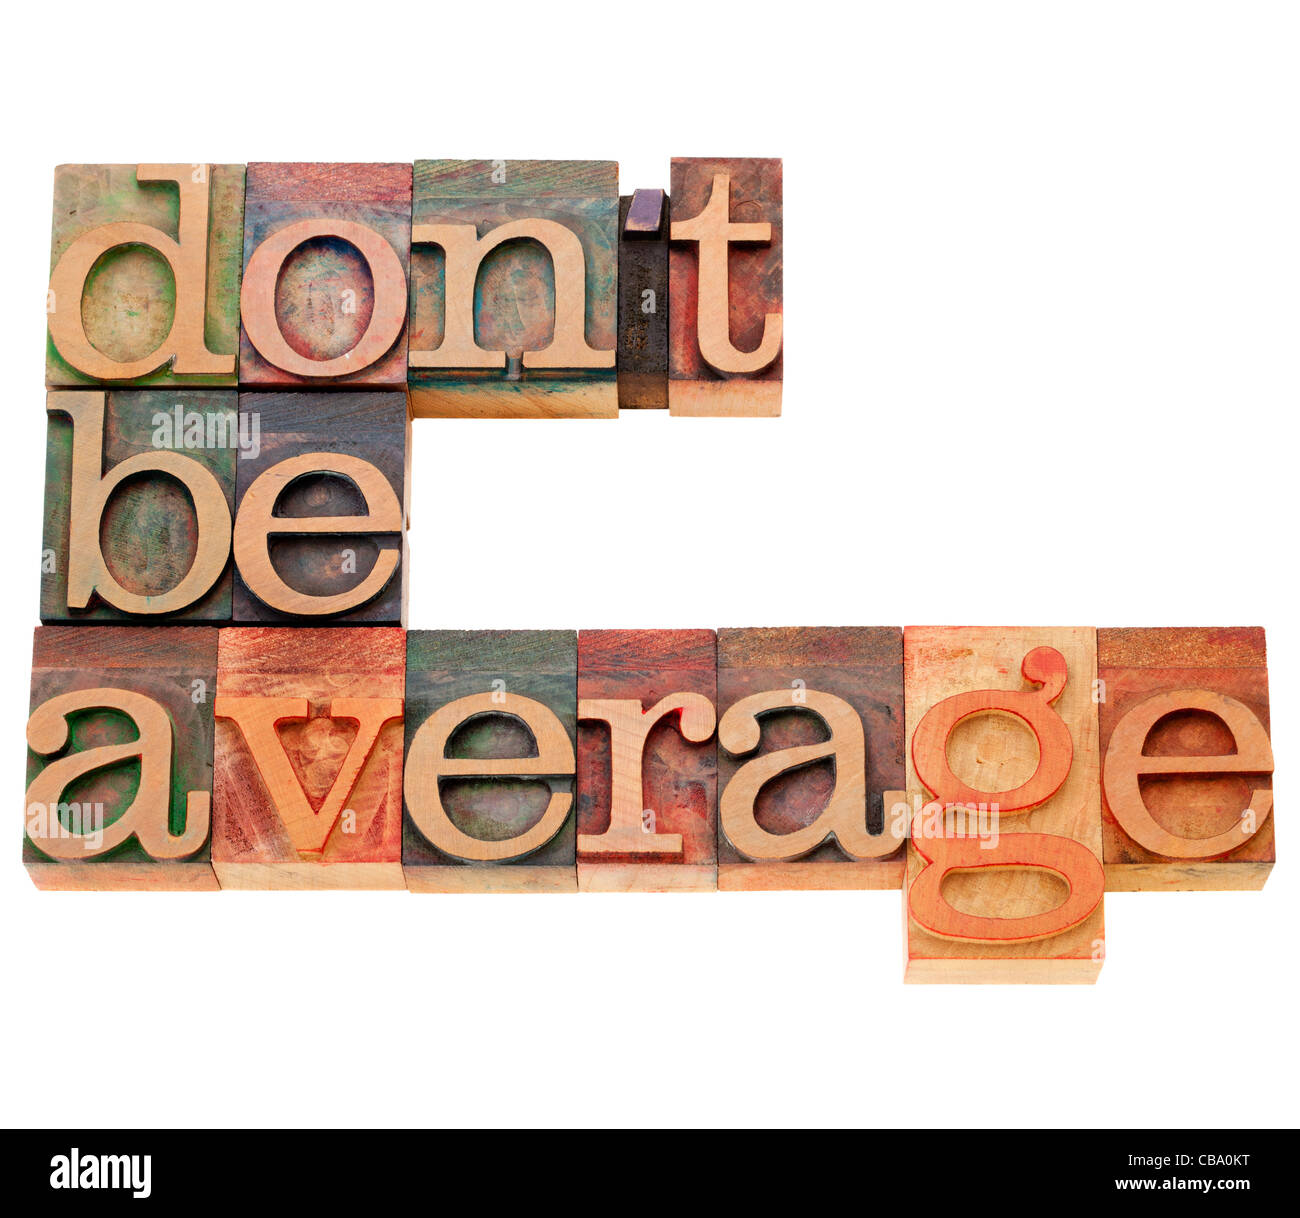 Motivational concept - Do not be average - isolated text in vintage wood letterpress printing blocks Stock Photo